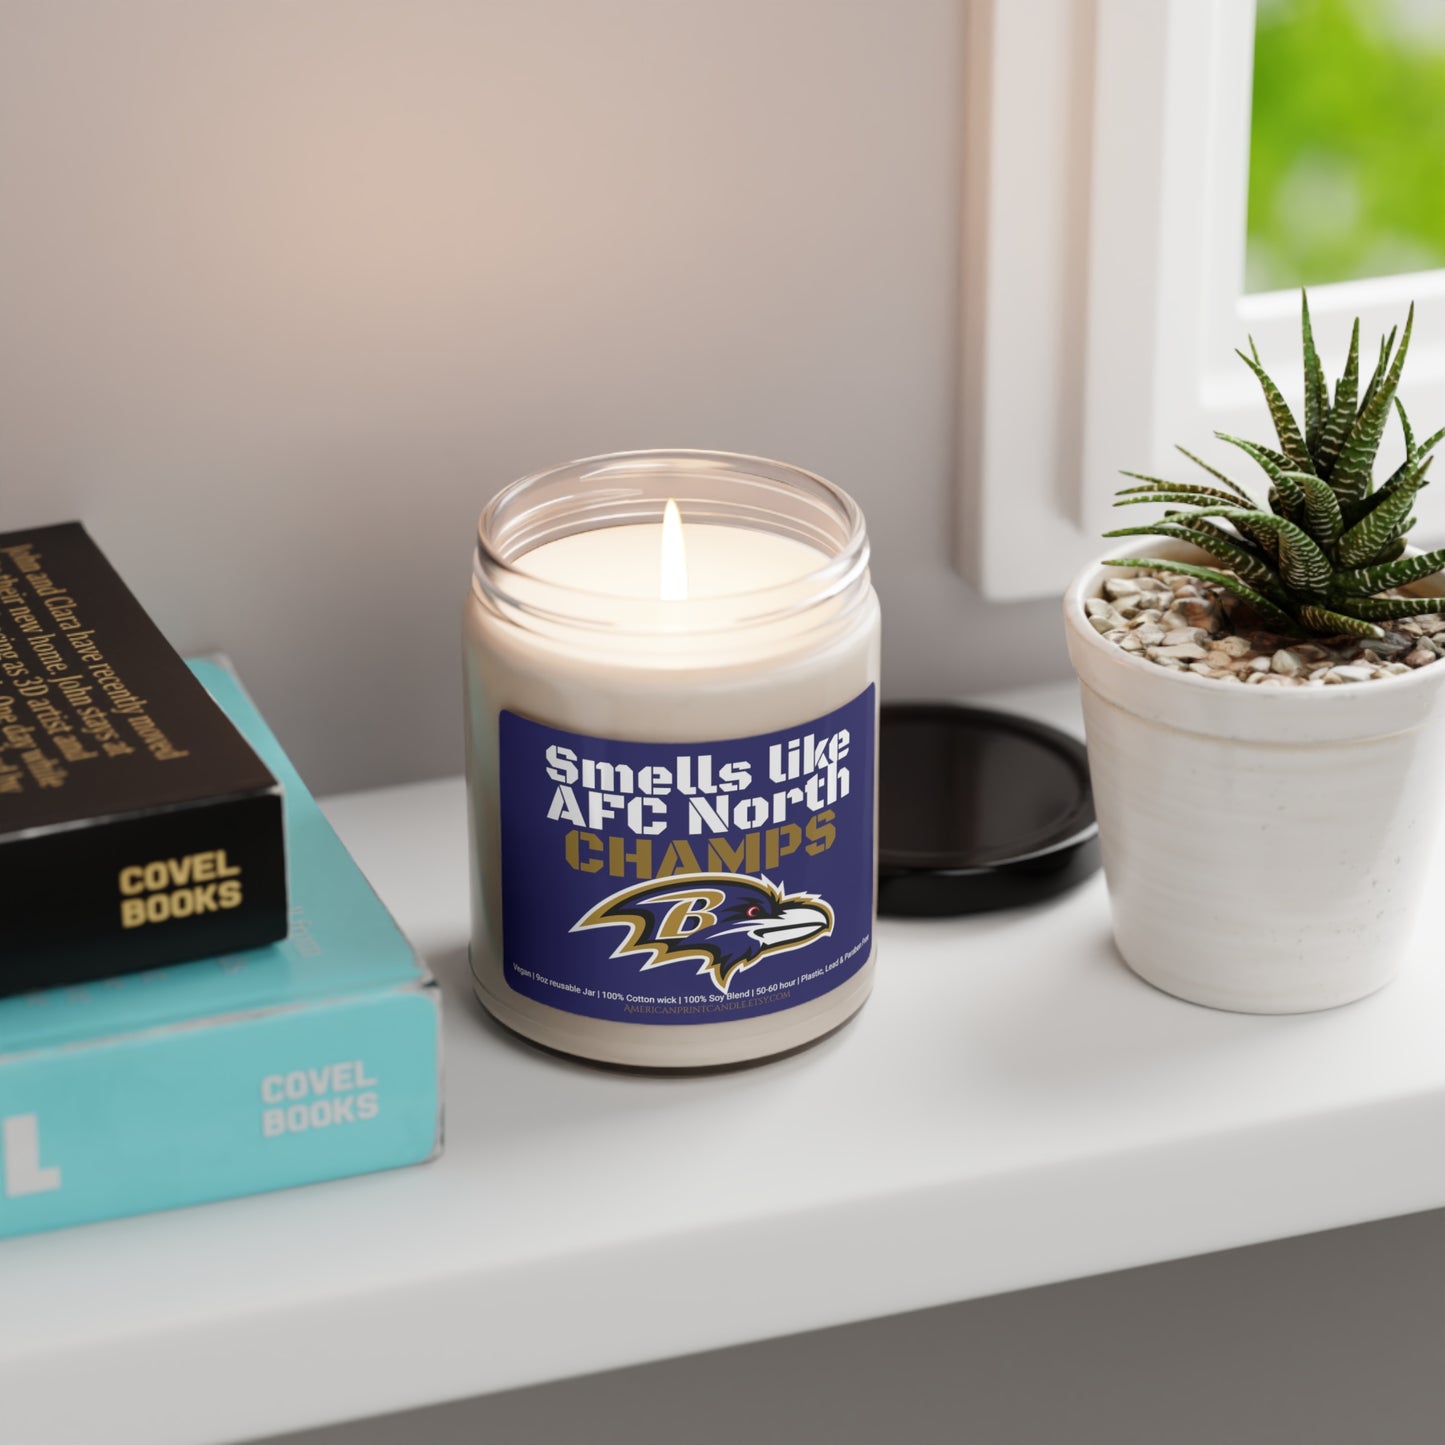 Smells Like AFC North CHAMPS Baltimore Ravens Scented Soy Candle 9oz